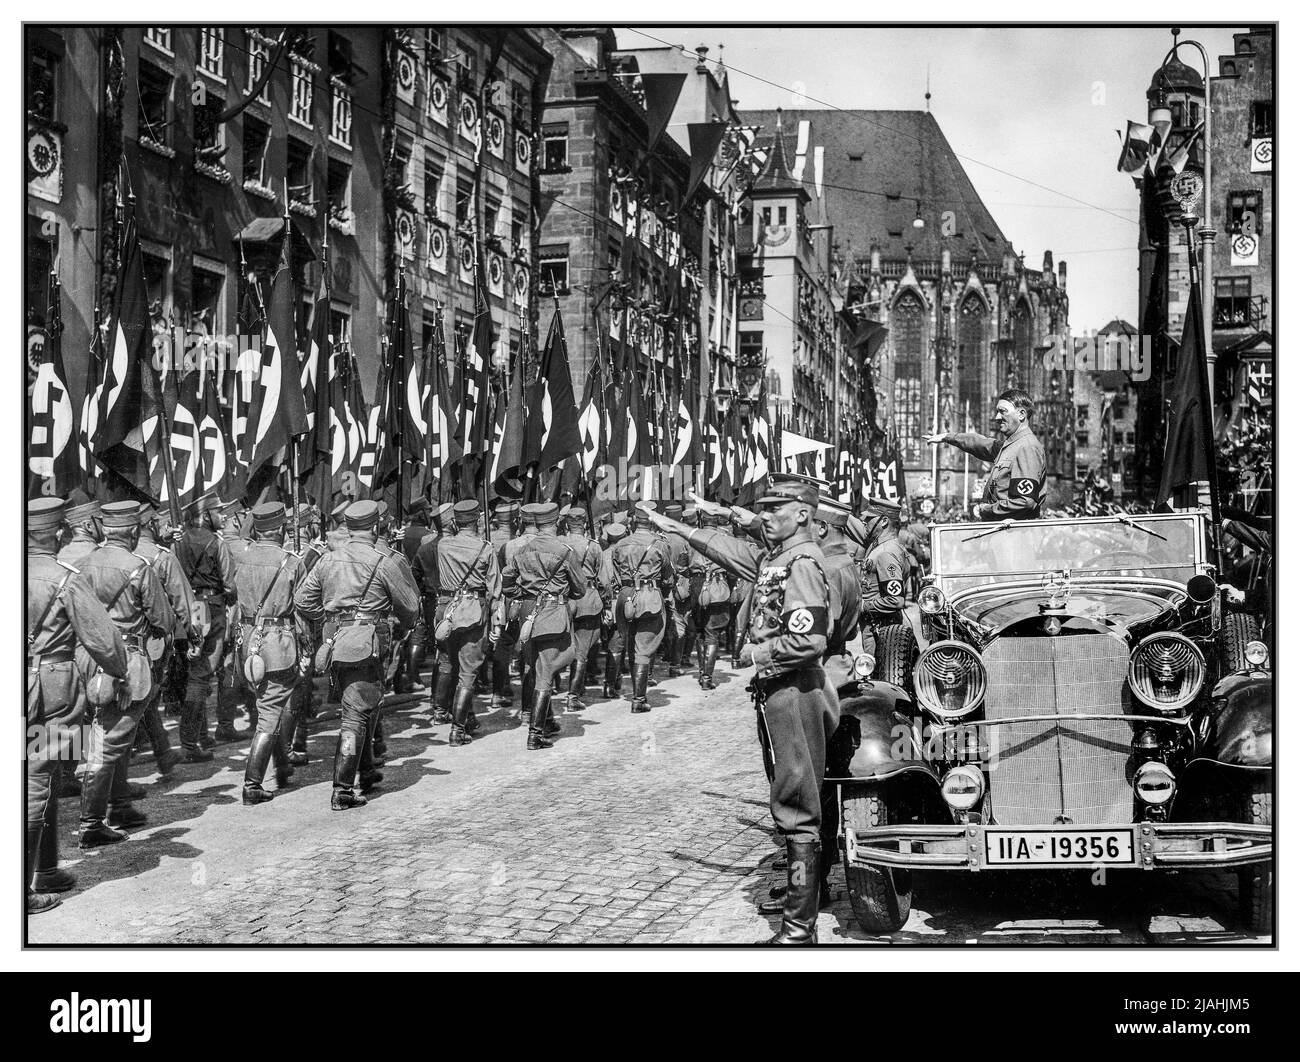 Nuremberg SA Rally 1930s with Adolf Hitler standing in his Mercedes-Benz 770 reviewing SA (Sturmabteilung) members in a parade during the Nuremberg rally 1935, the 7th Nazi Party Congress held in Nuremberg, September 10–16. Hitler is accompanied by the Blutfahne, ('Blood Flag', ceremonial swastika flag) and its bearer SS-Sturmbannführer Jakob Grimminger. Stock Photo